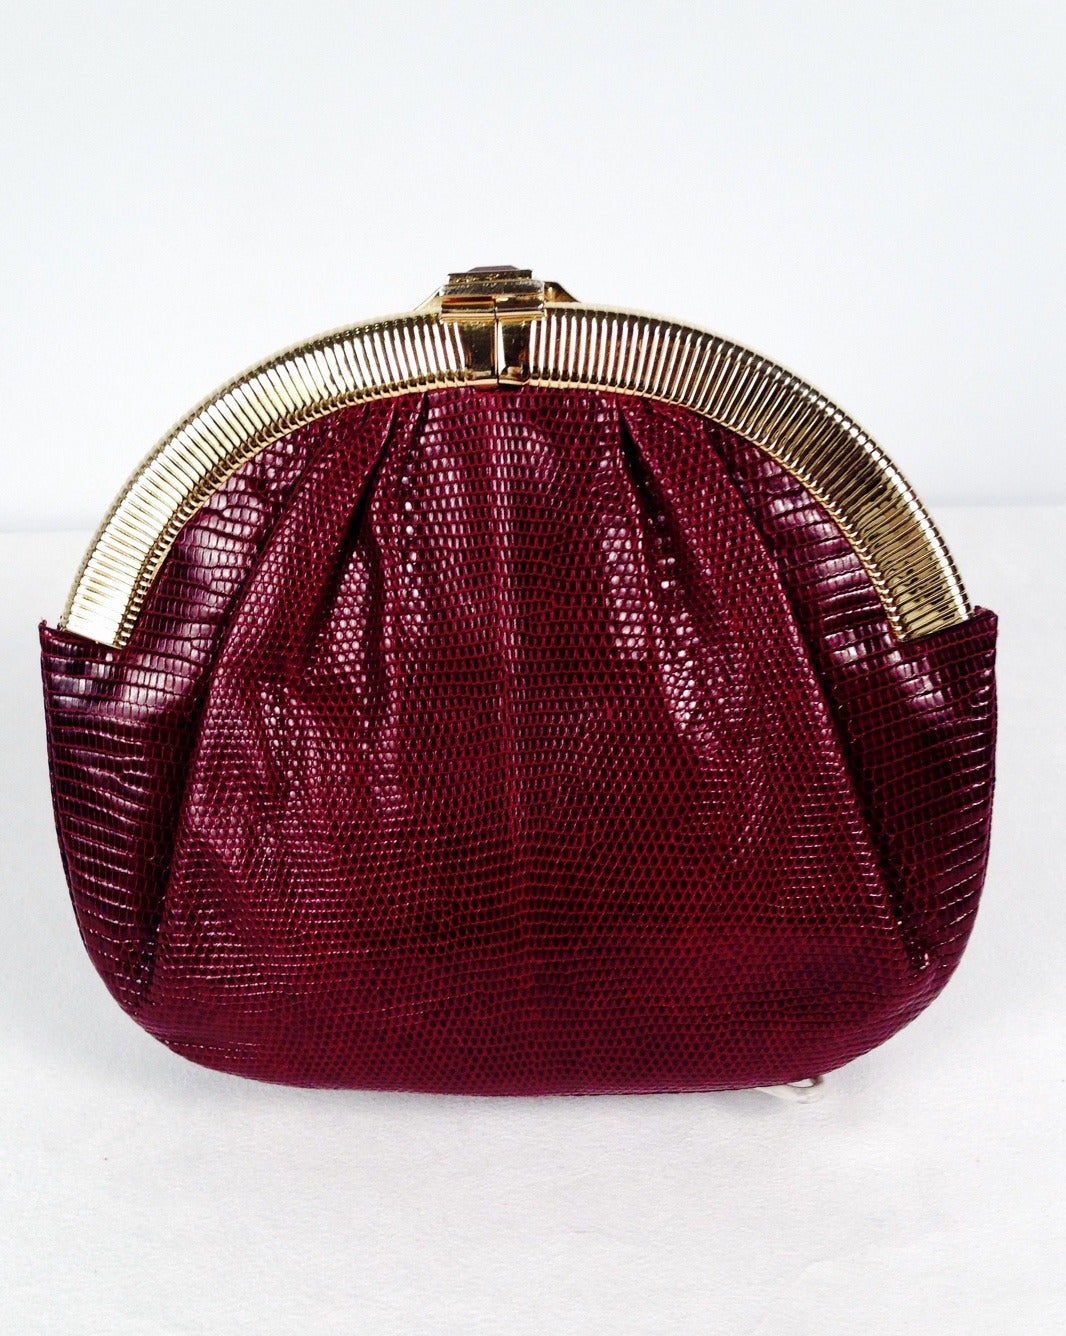 Vintage Burgundy Lizard Evening Bag is highly desired by all collectors of Judith Leiber! Features slightly gathered, butter-soft lizard skin. Bag easily converts from clutch to shoulder bag with minimal effort! Forgiving gusset accommodates more